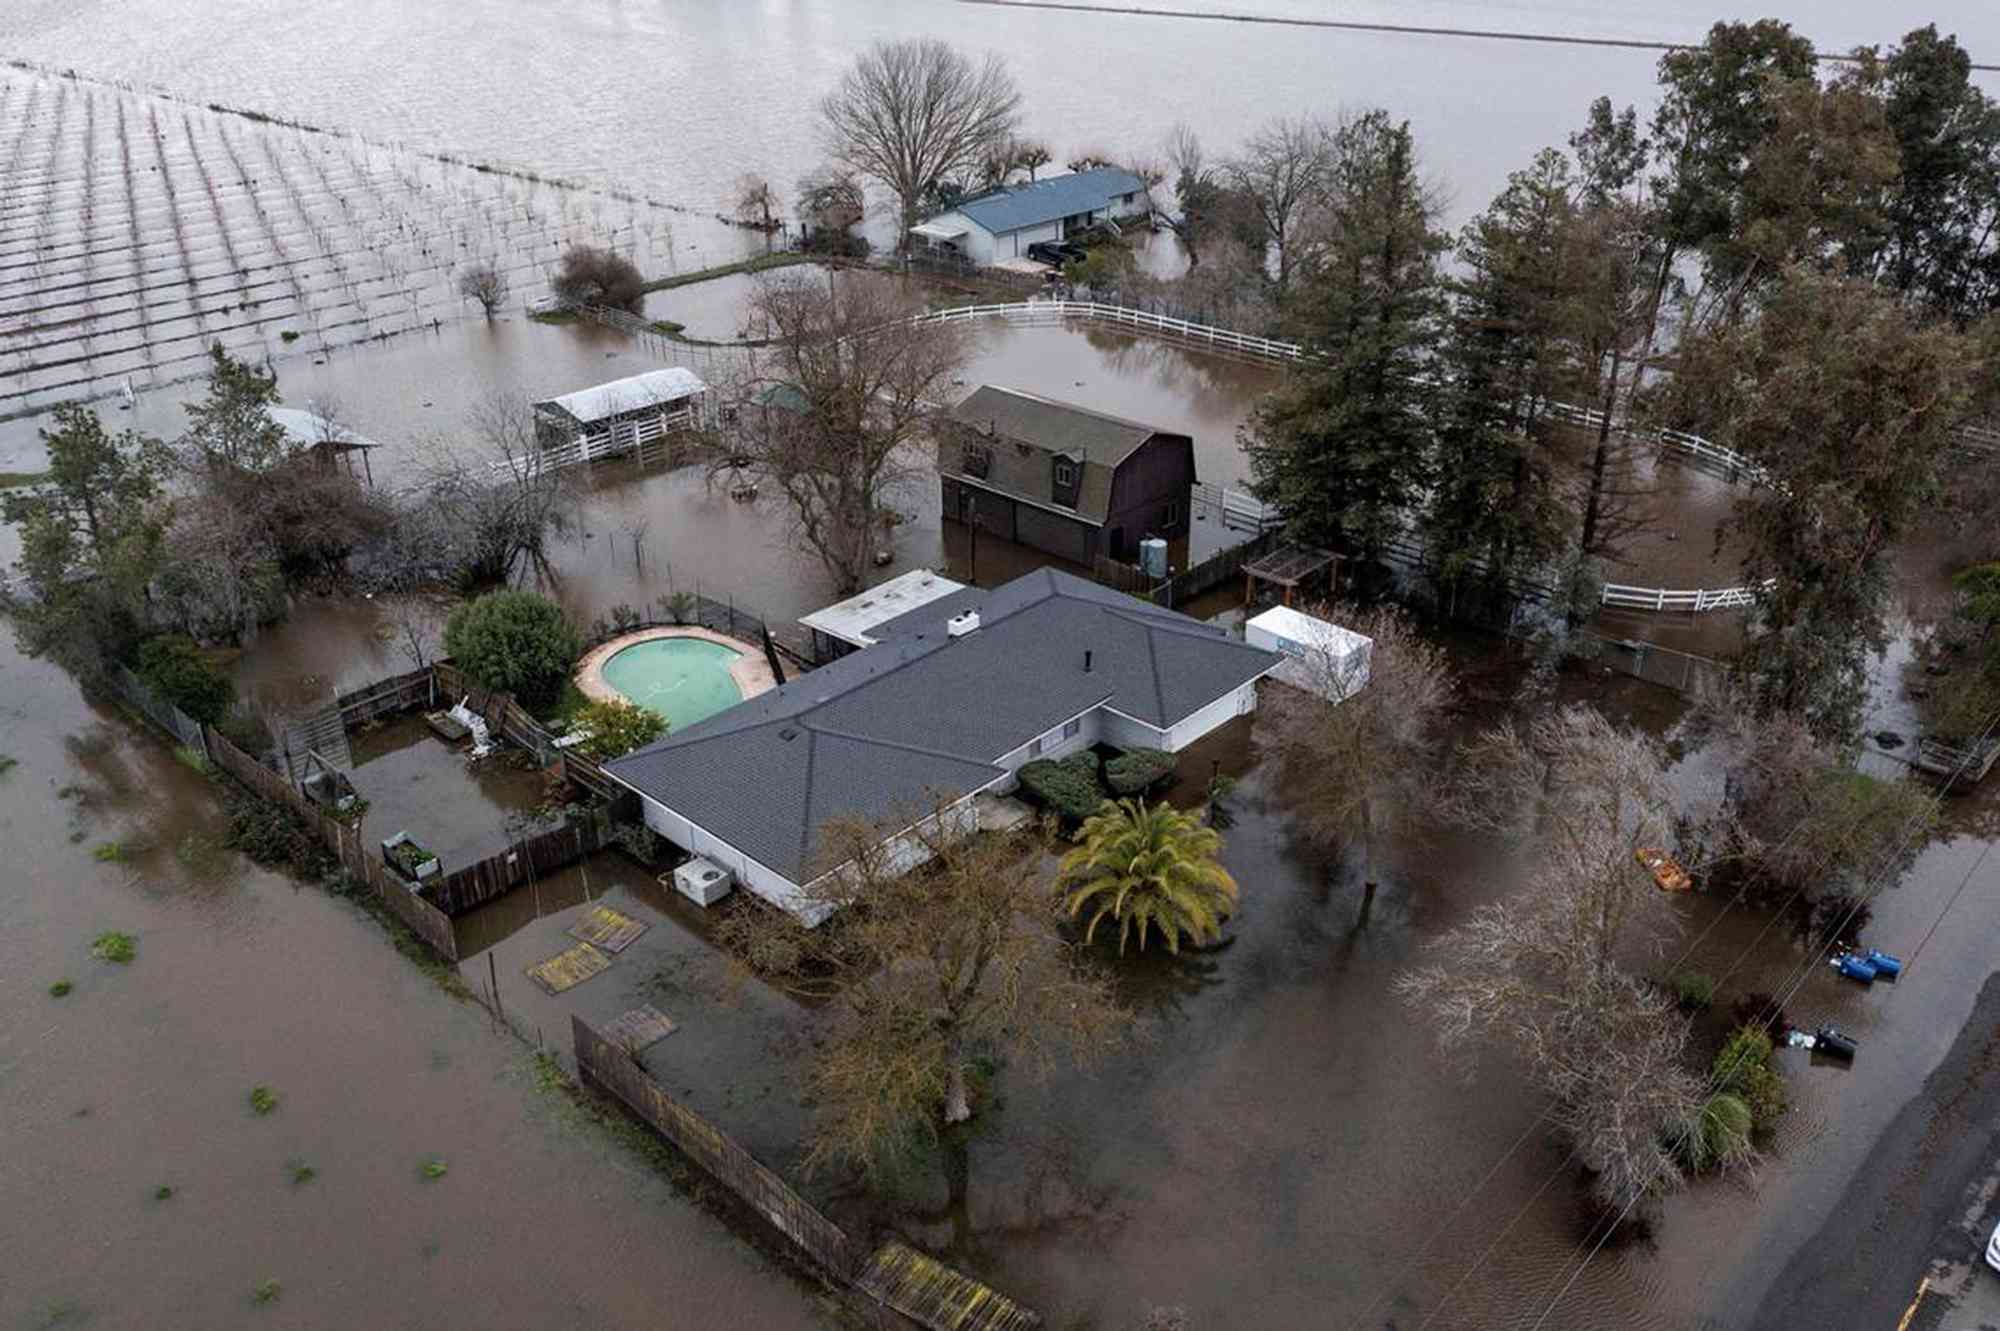 January 2, 2023, Sacramento County, California, USA: Flooded homes are seen in Point Pleasant, California, on Monday, as an evacuation order for residents in Point Pleasant and a shelter-in-place order for those in Wilton remained in effect. A historic atmospheric river dumped a deluge of rain across Northern California in the final days of 2022. The Cosumnes River swelled to its highest level ever in history on Sunday and parts of Sacramento County flooded.